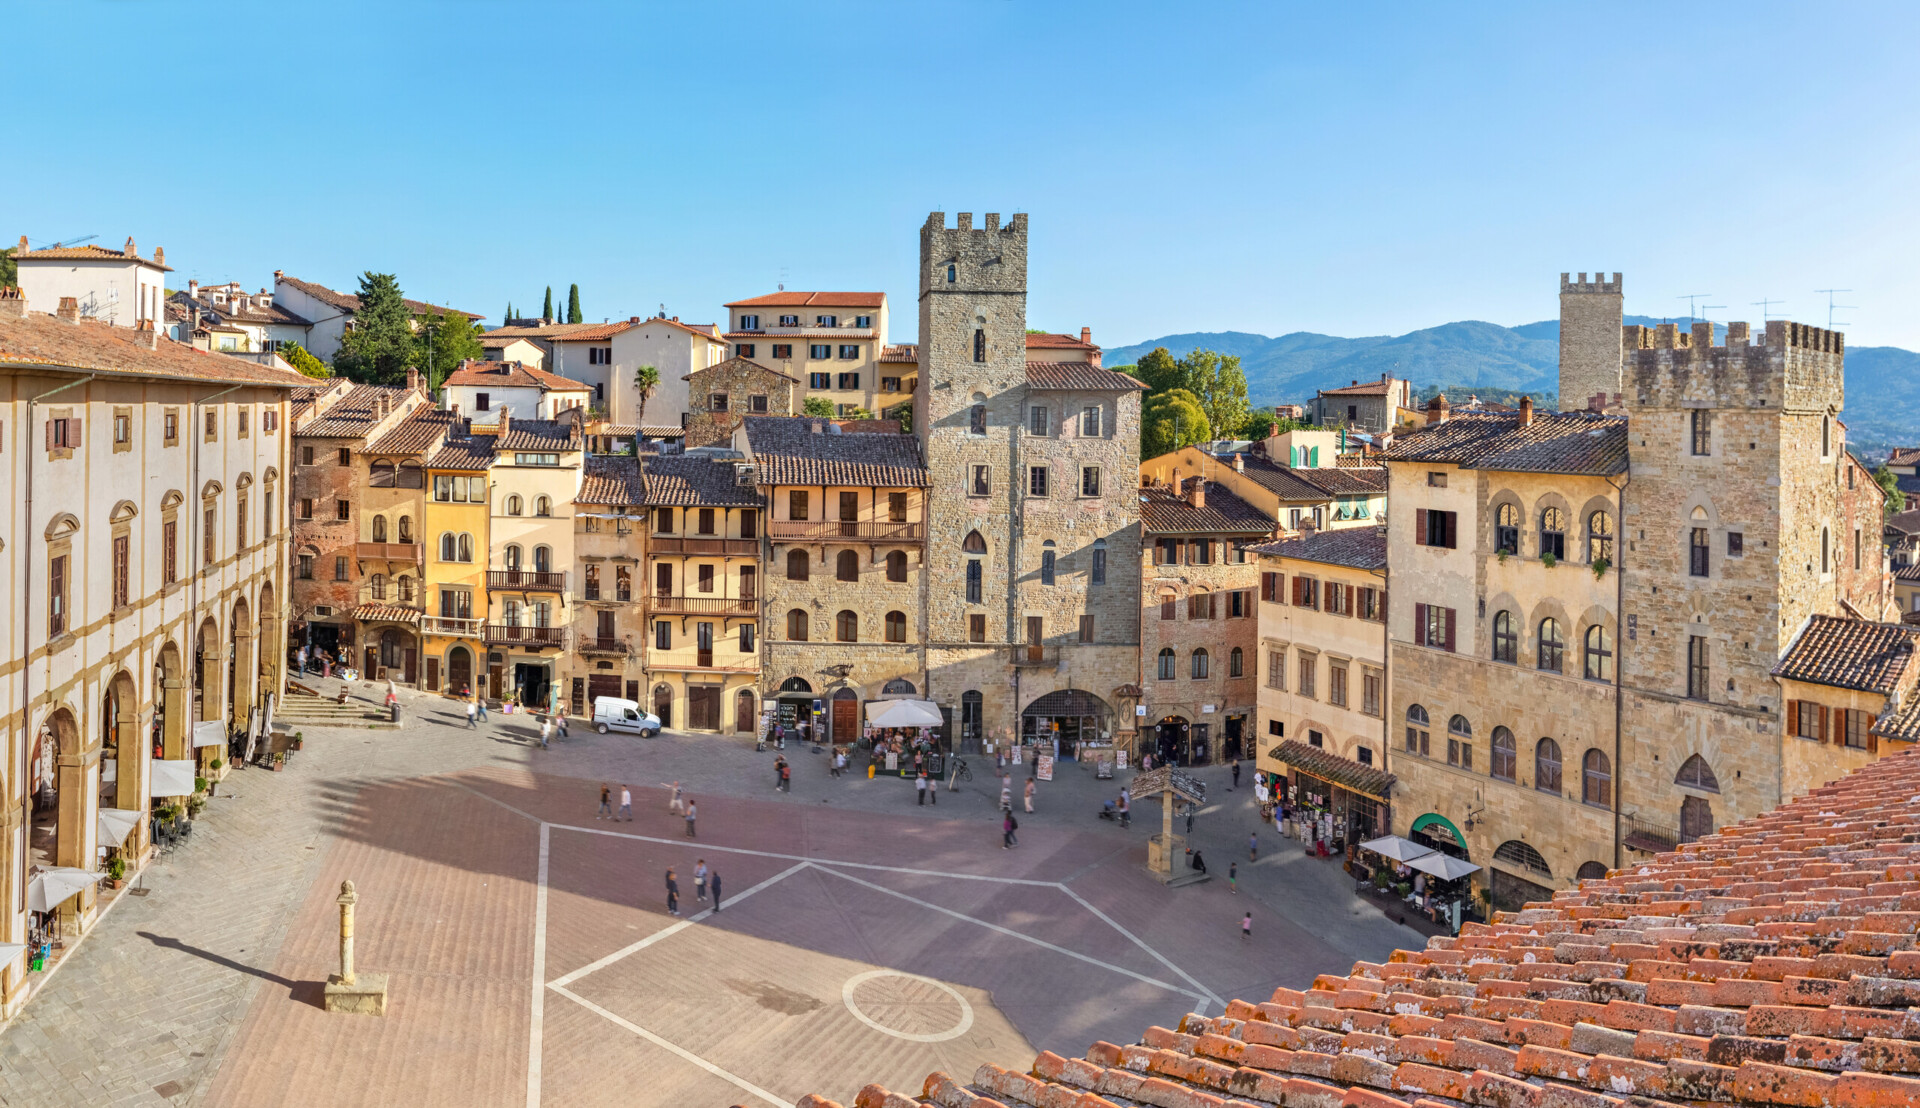 Panoramic aerial view of Piazza Grande square in Arezzo, Tuscany, Italy